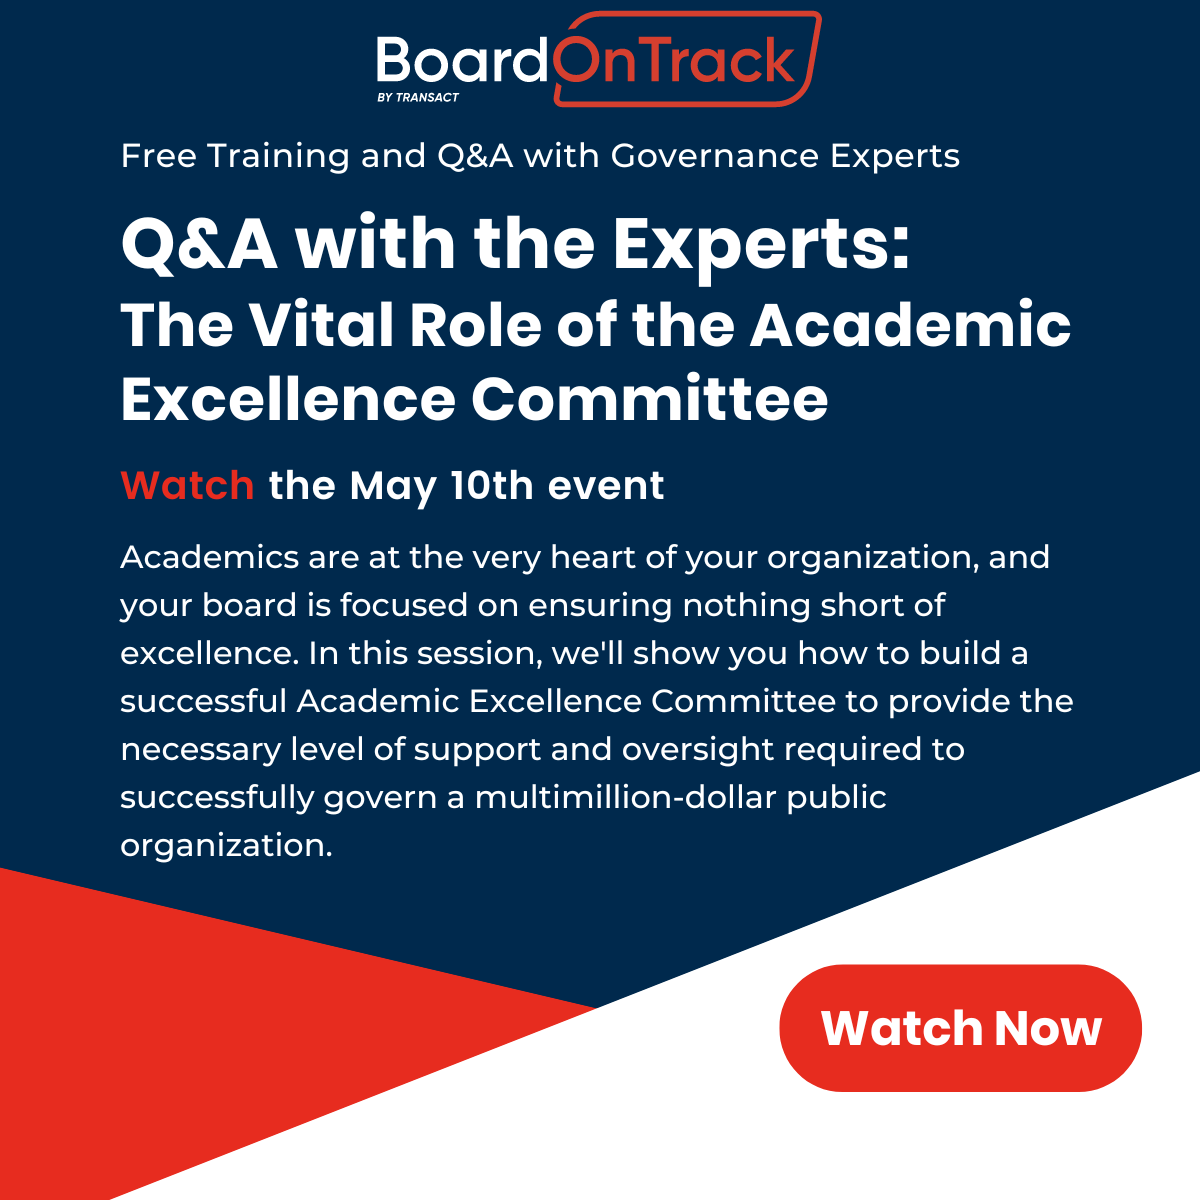 The Vital Role of the Academic Excellence Committee 